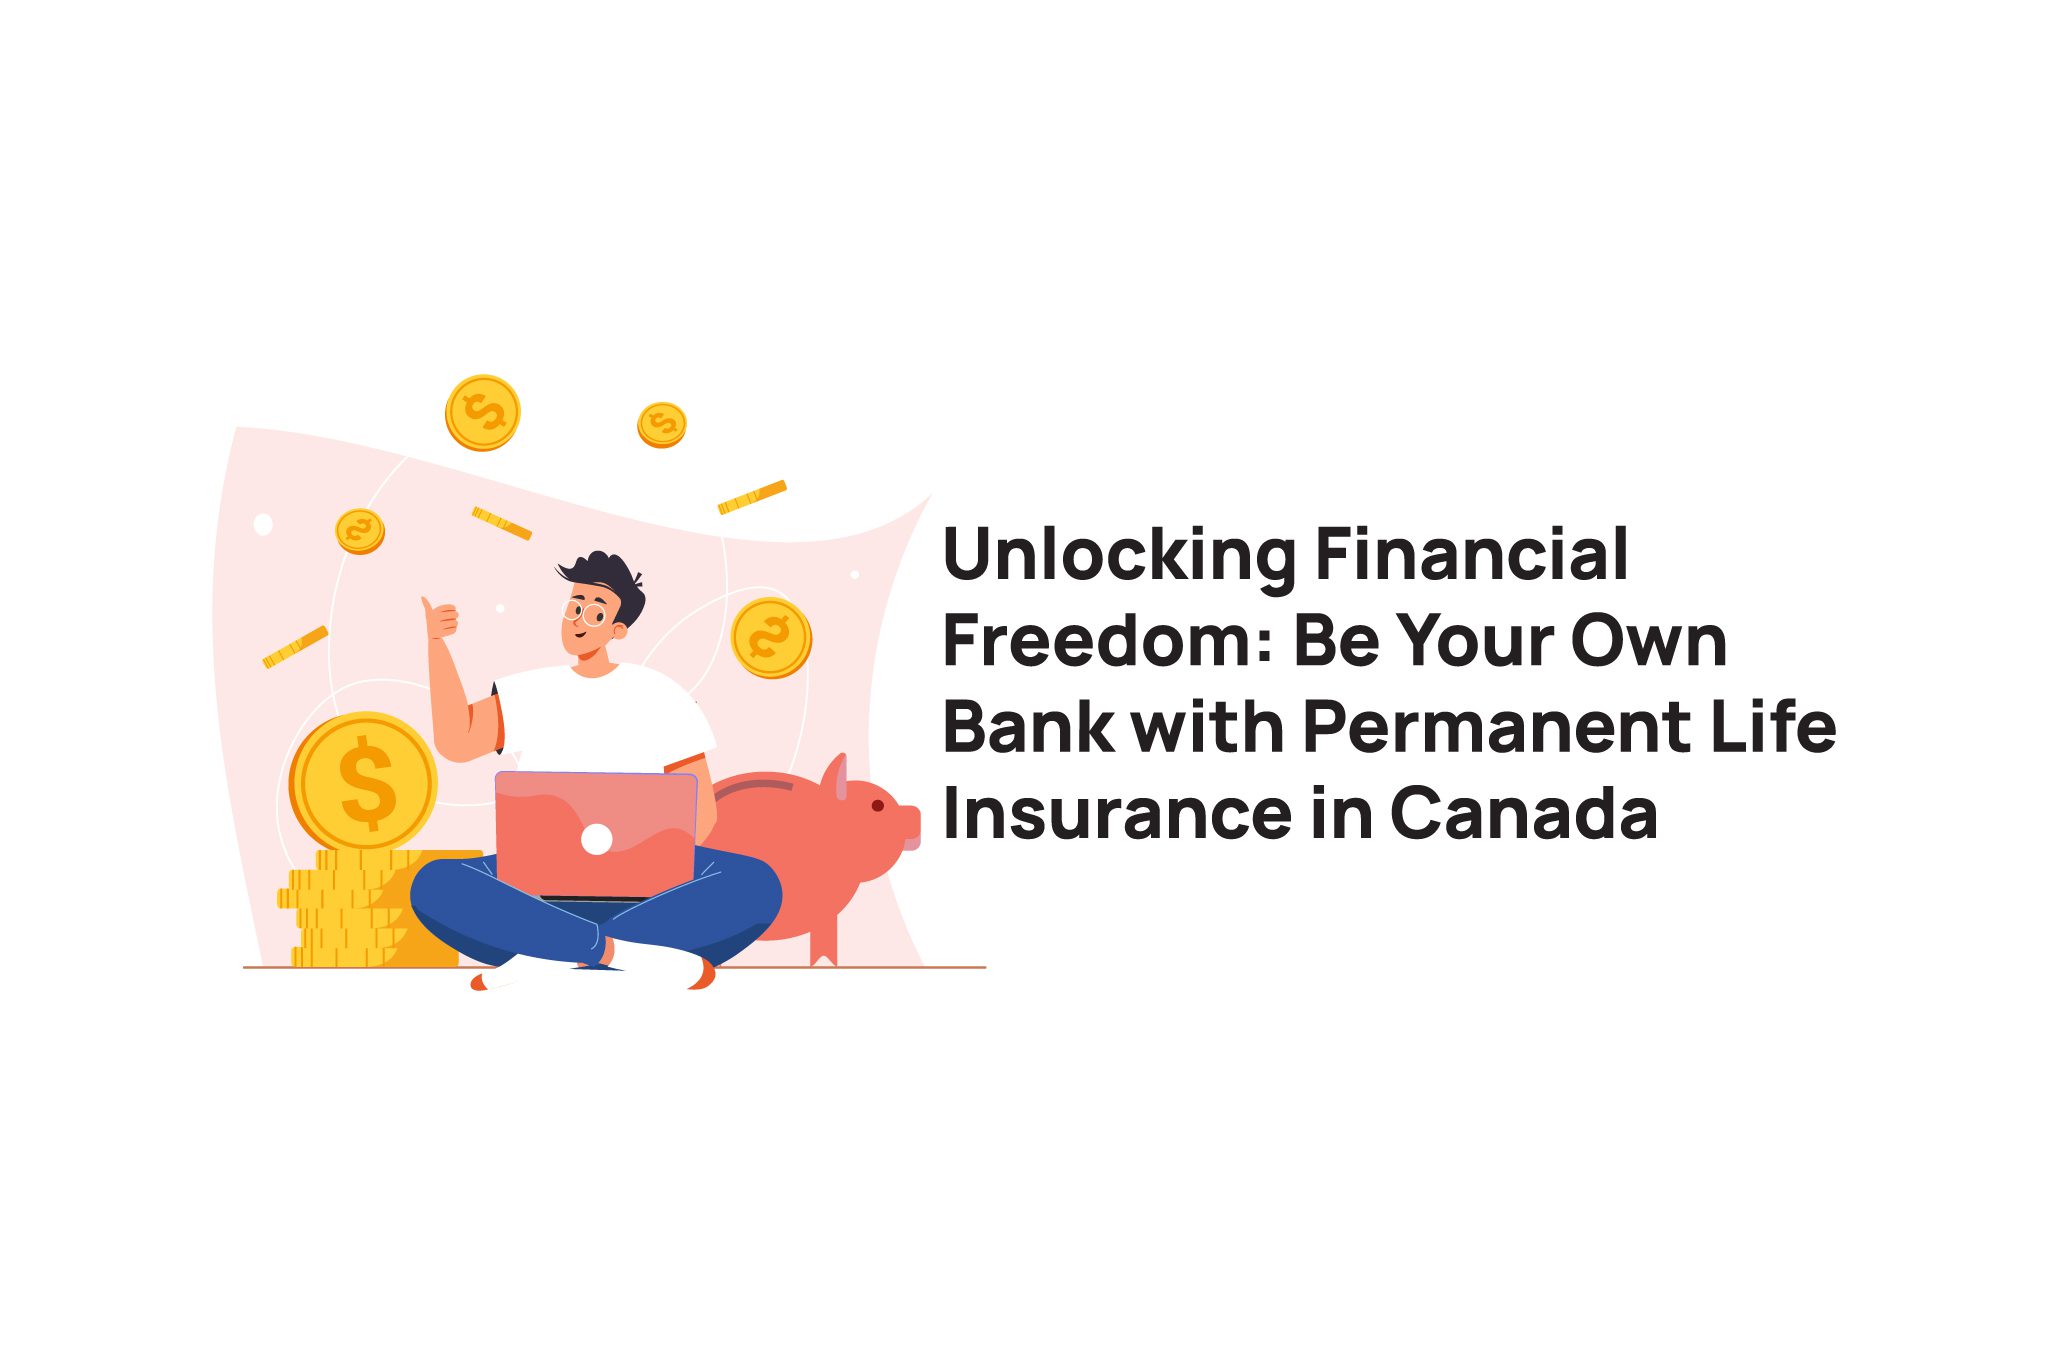 Unlocking Financial Freedom: Be Your Own Bank with Permanent Life Insurance in Canada